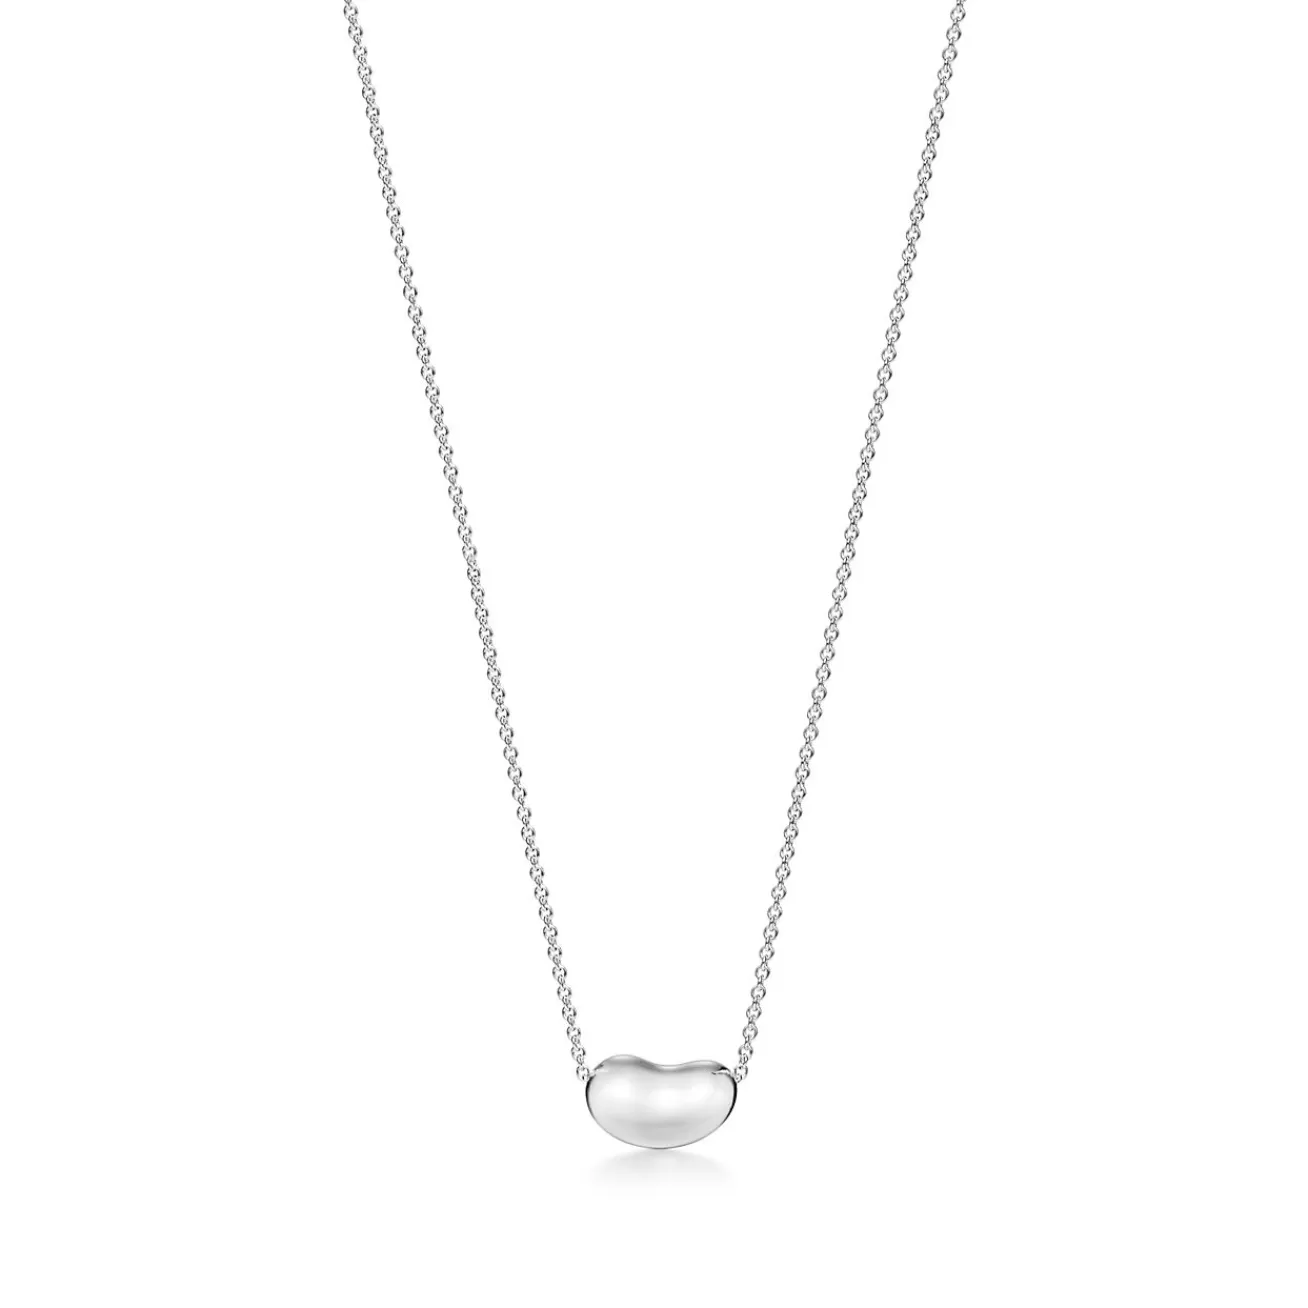 Tiffany & Co. Elsa Peretti® Bean® design Pendant in Sterling Silver, 12 mm | ^ Necklaces & Pendants | Gifts for Her